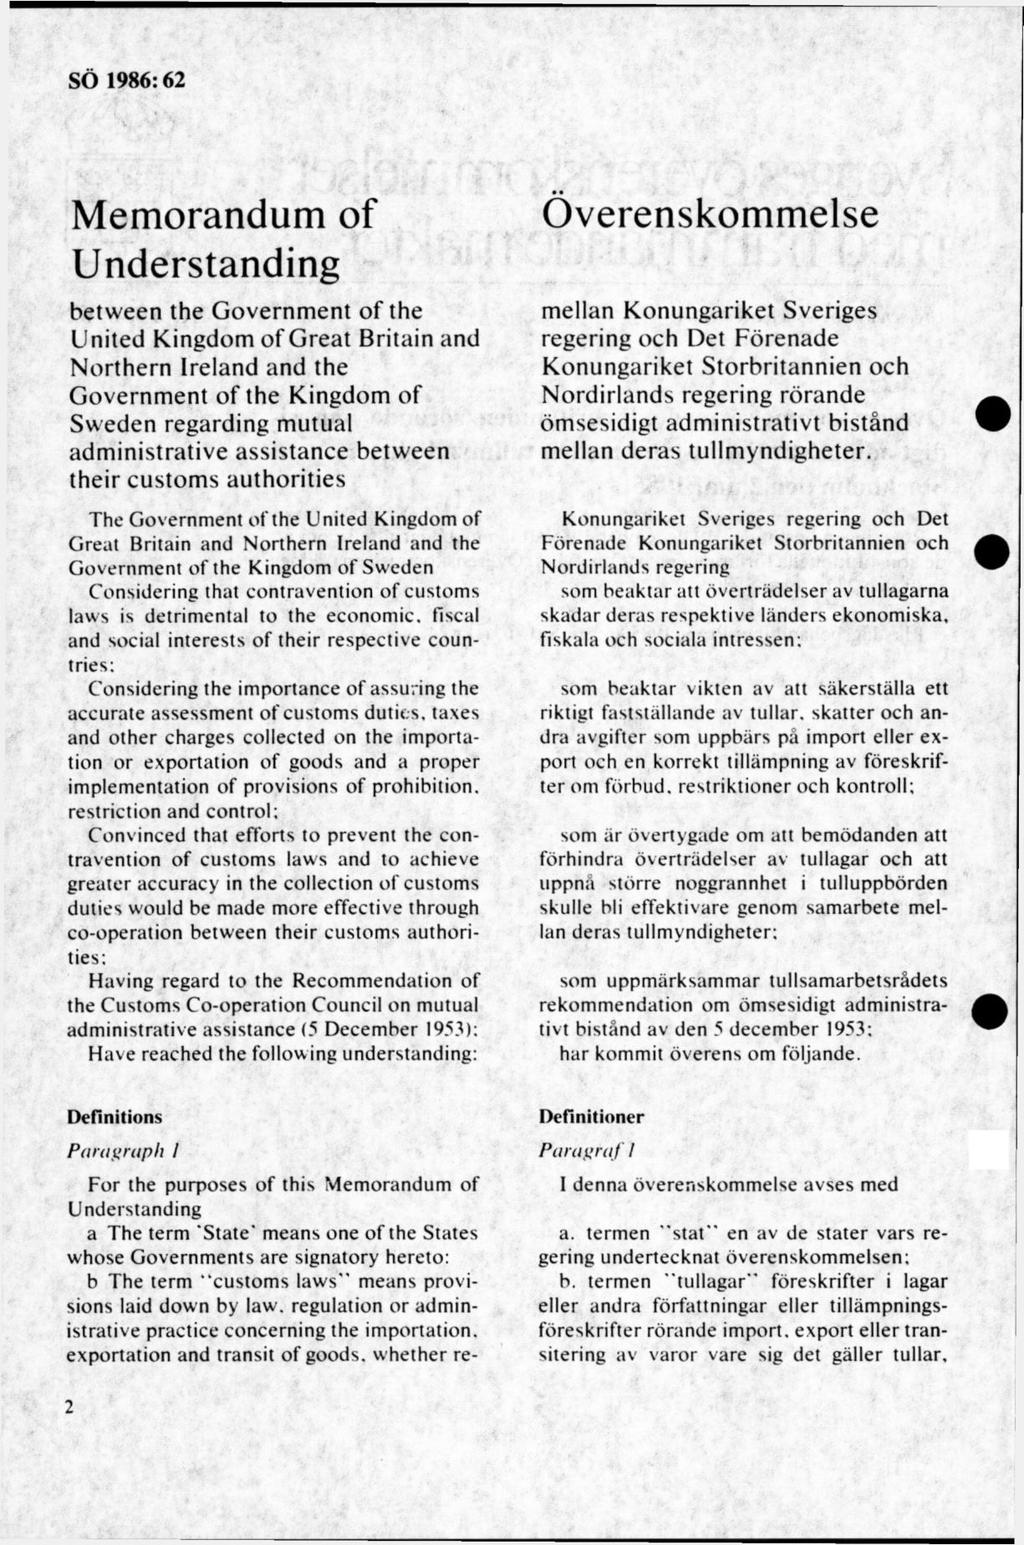 Memorandum of Understanding between the Government of the United Kingdom of Great Britain and Northern Ireland and the Government of the Kingdom of Sweden regarding mutual administrative assistance